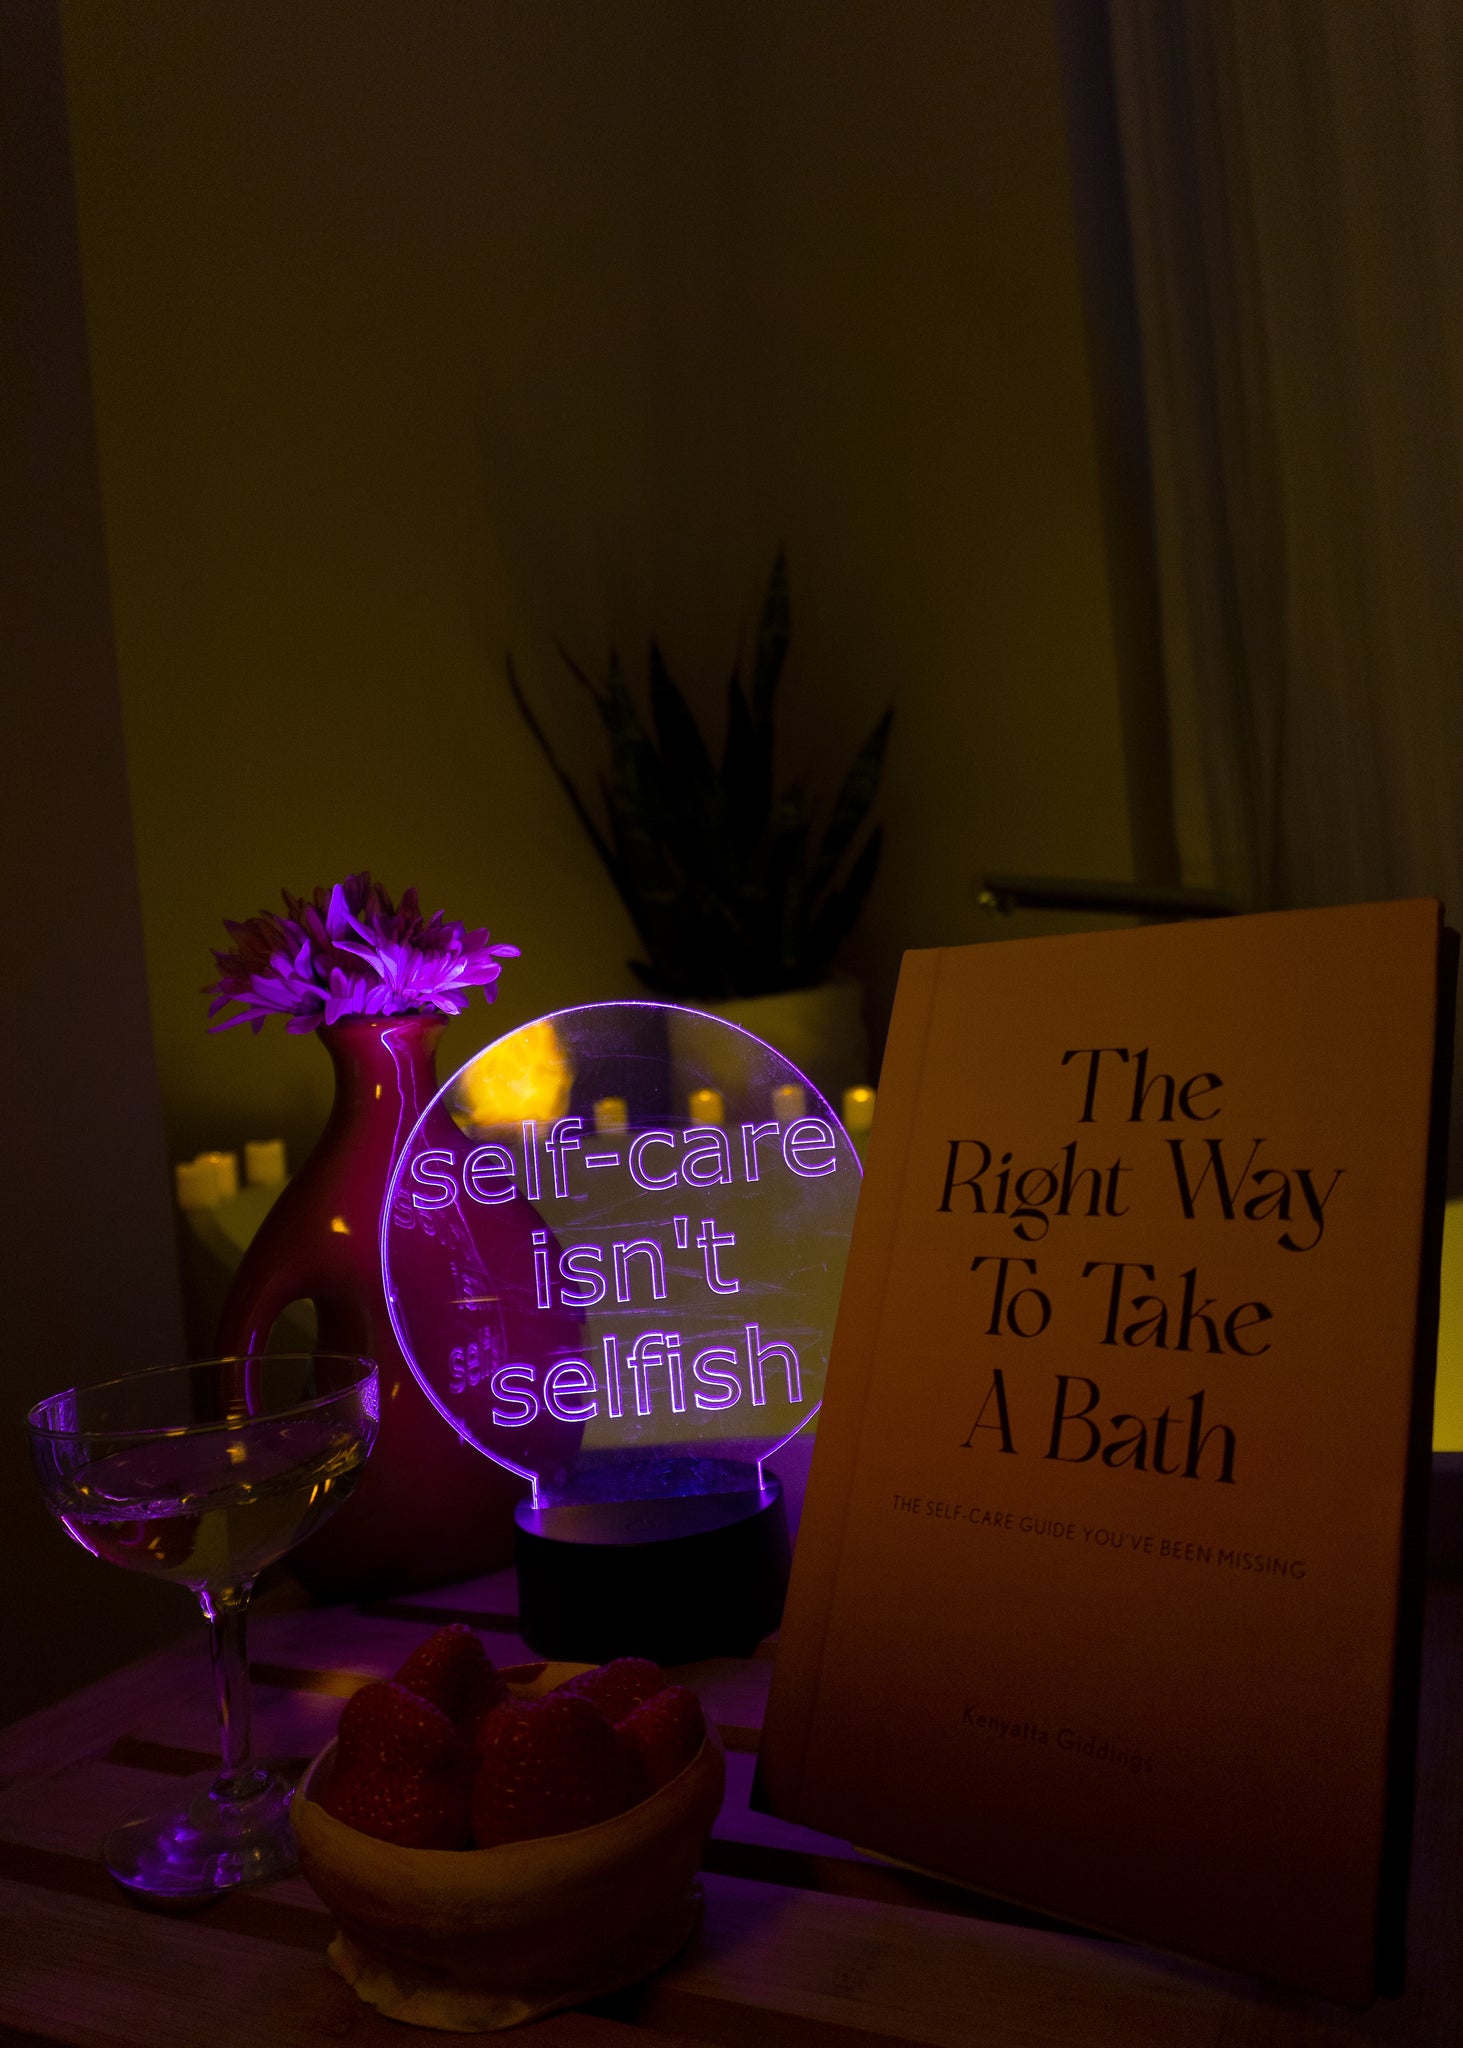 Light up sign for room with a self care message in front of bathtub with candles next to glass of champagne and strawberries and The Right Way To Take A Bath book.